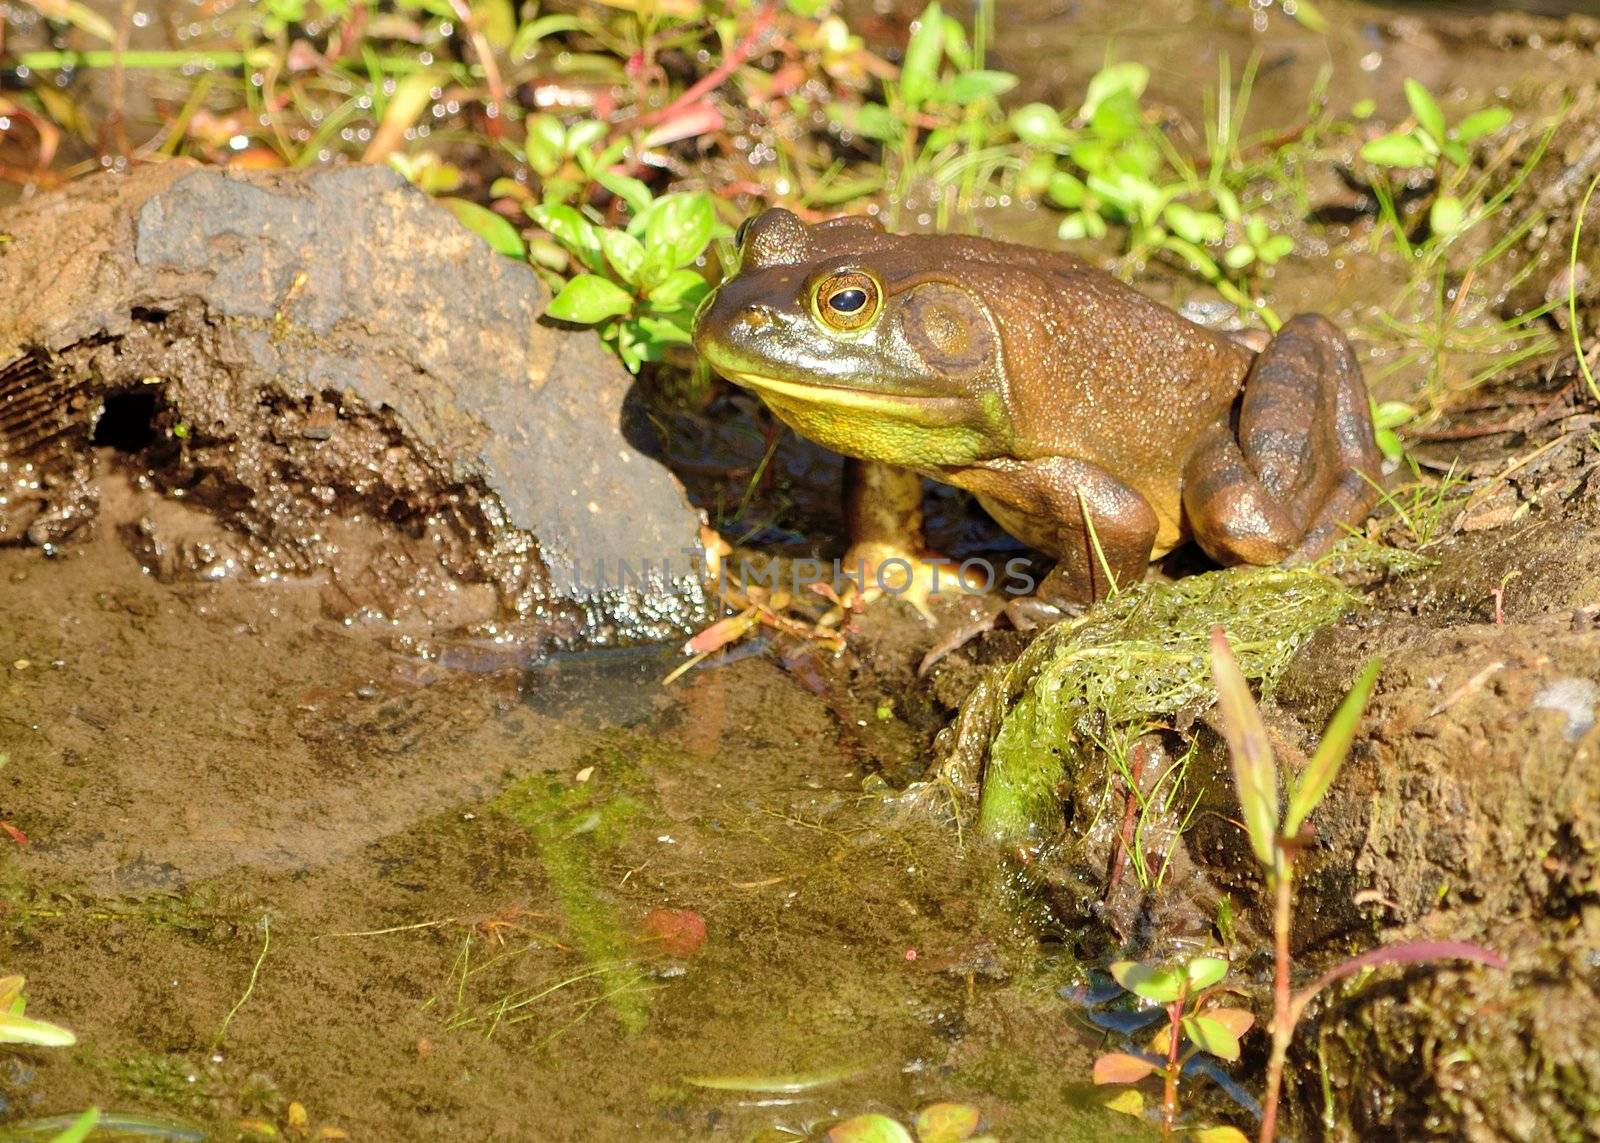 Bullfrog sitting in the water in a pond next to a log.